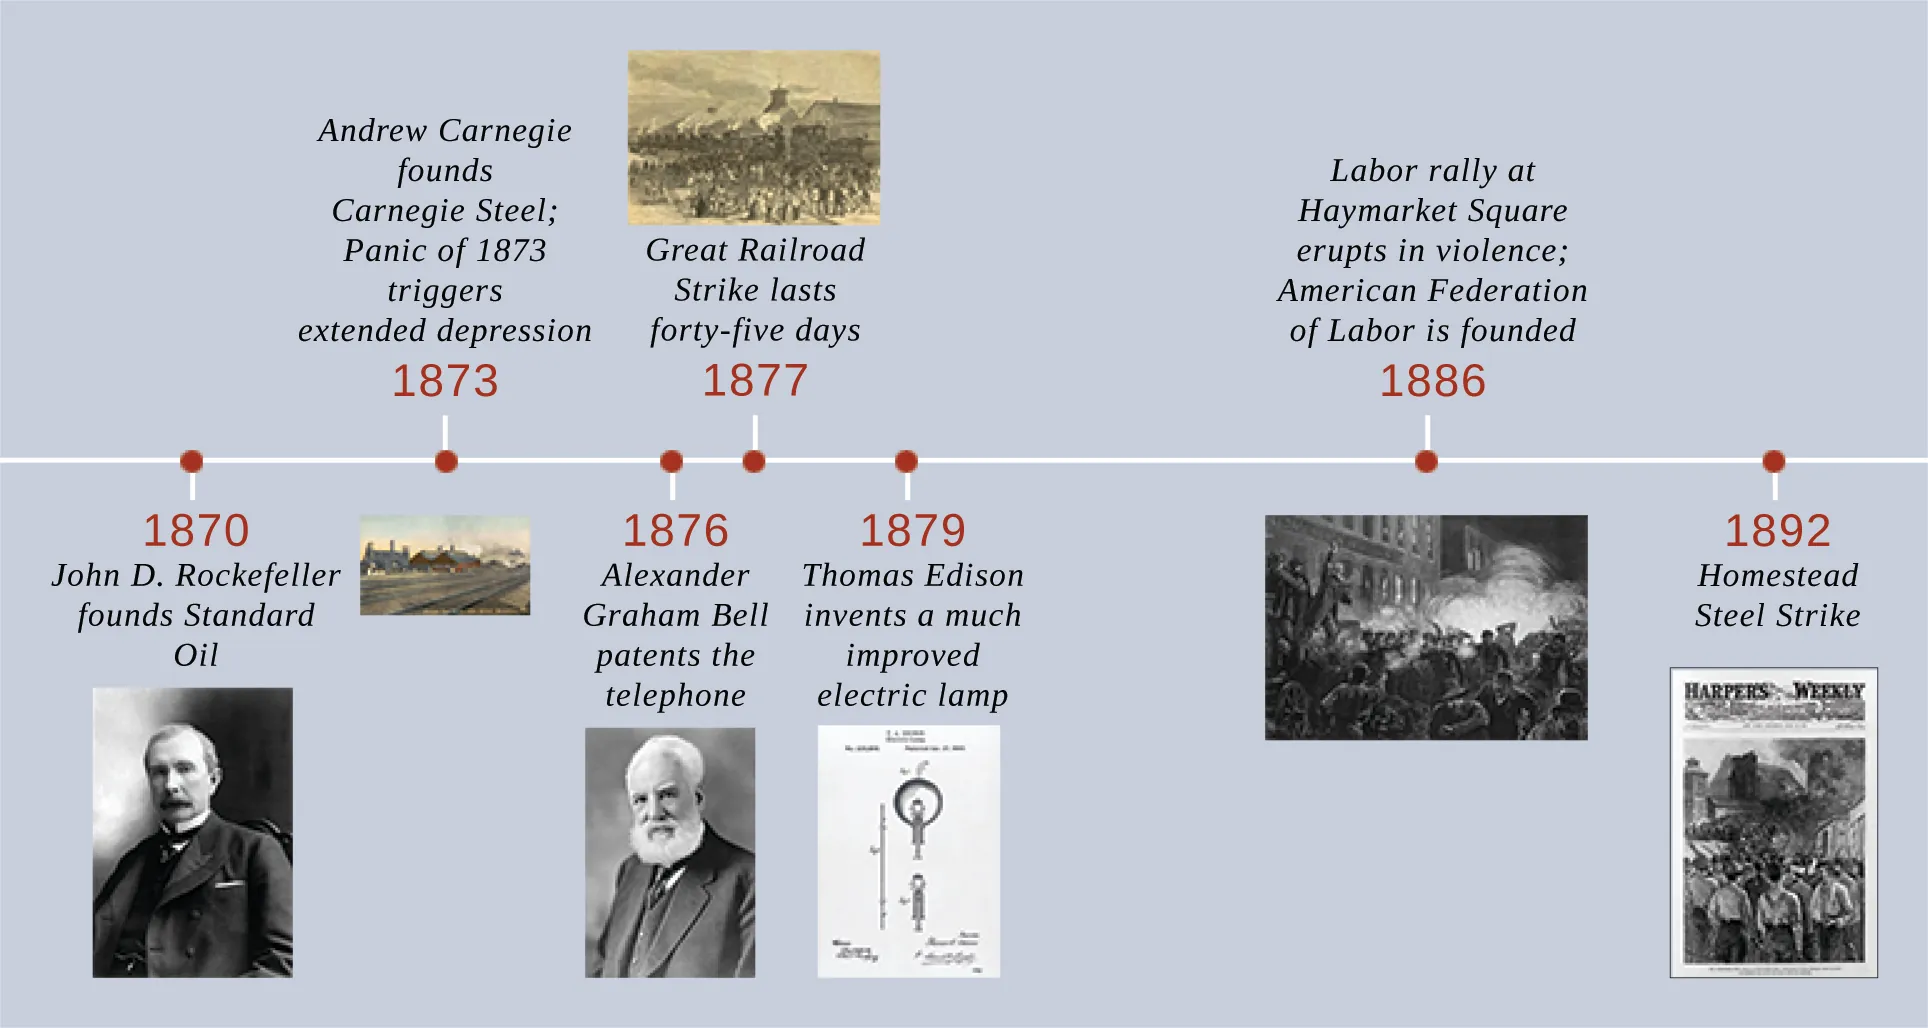 A timeline shows important events of the era. In 1870, John D. Rockefeller founds Standard Oil; a photograph of Rockefeller is shown. In 1873, Andrew Carnegie founds Carnegie Steel, and the Panic of 1873 triggers extended depression; a drawing of the Carnegie Steel factory is shown. In 1876, Alexander Graham Bell patents the telephone; a photograph of Bell is shown. In 1877, the Great Railroad Strike lasts forty-five days; a drawing of the strike is shown. In 1879, Thomas Edison invents a much improved electric lamp; a diagram of Edison’s incandescent light bulb is shown. In 1886, a labor rally at Haymarket Square erupts in violence, and the American Federation of Labor is founded; an engraving depicting the Haymarket violence is shown. In 1892, the Homestead Steel Strike occurs; a magazine cover with a drawing of the newly surrendered strikers is shown.